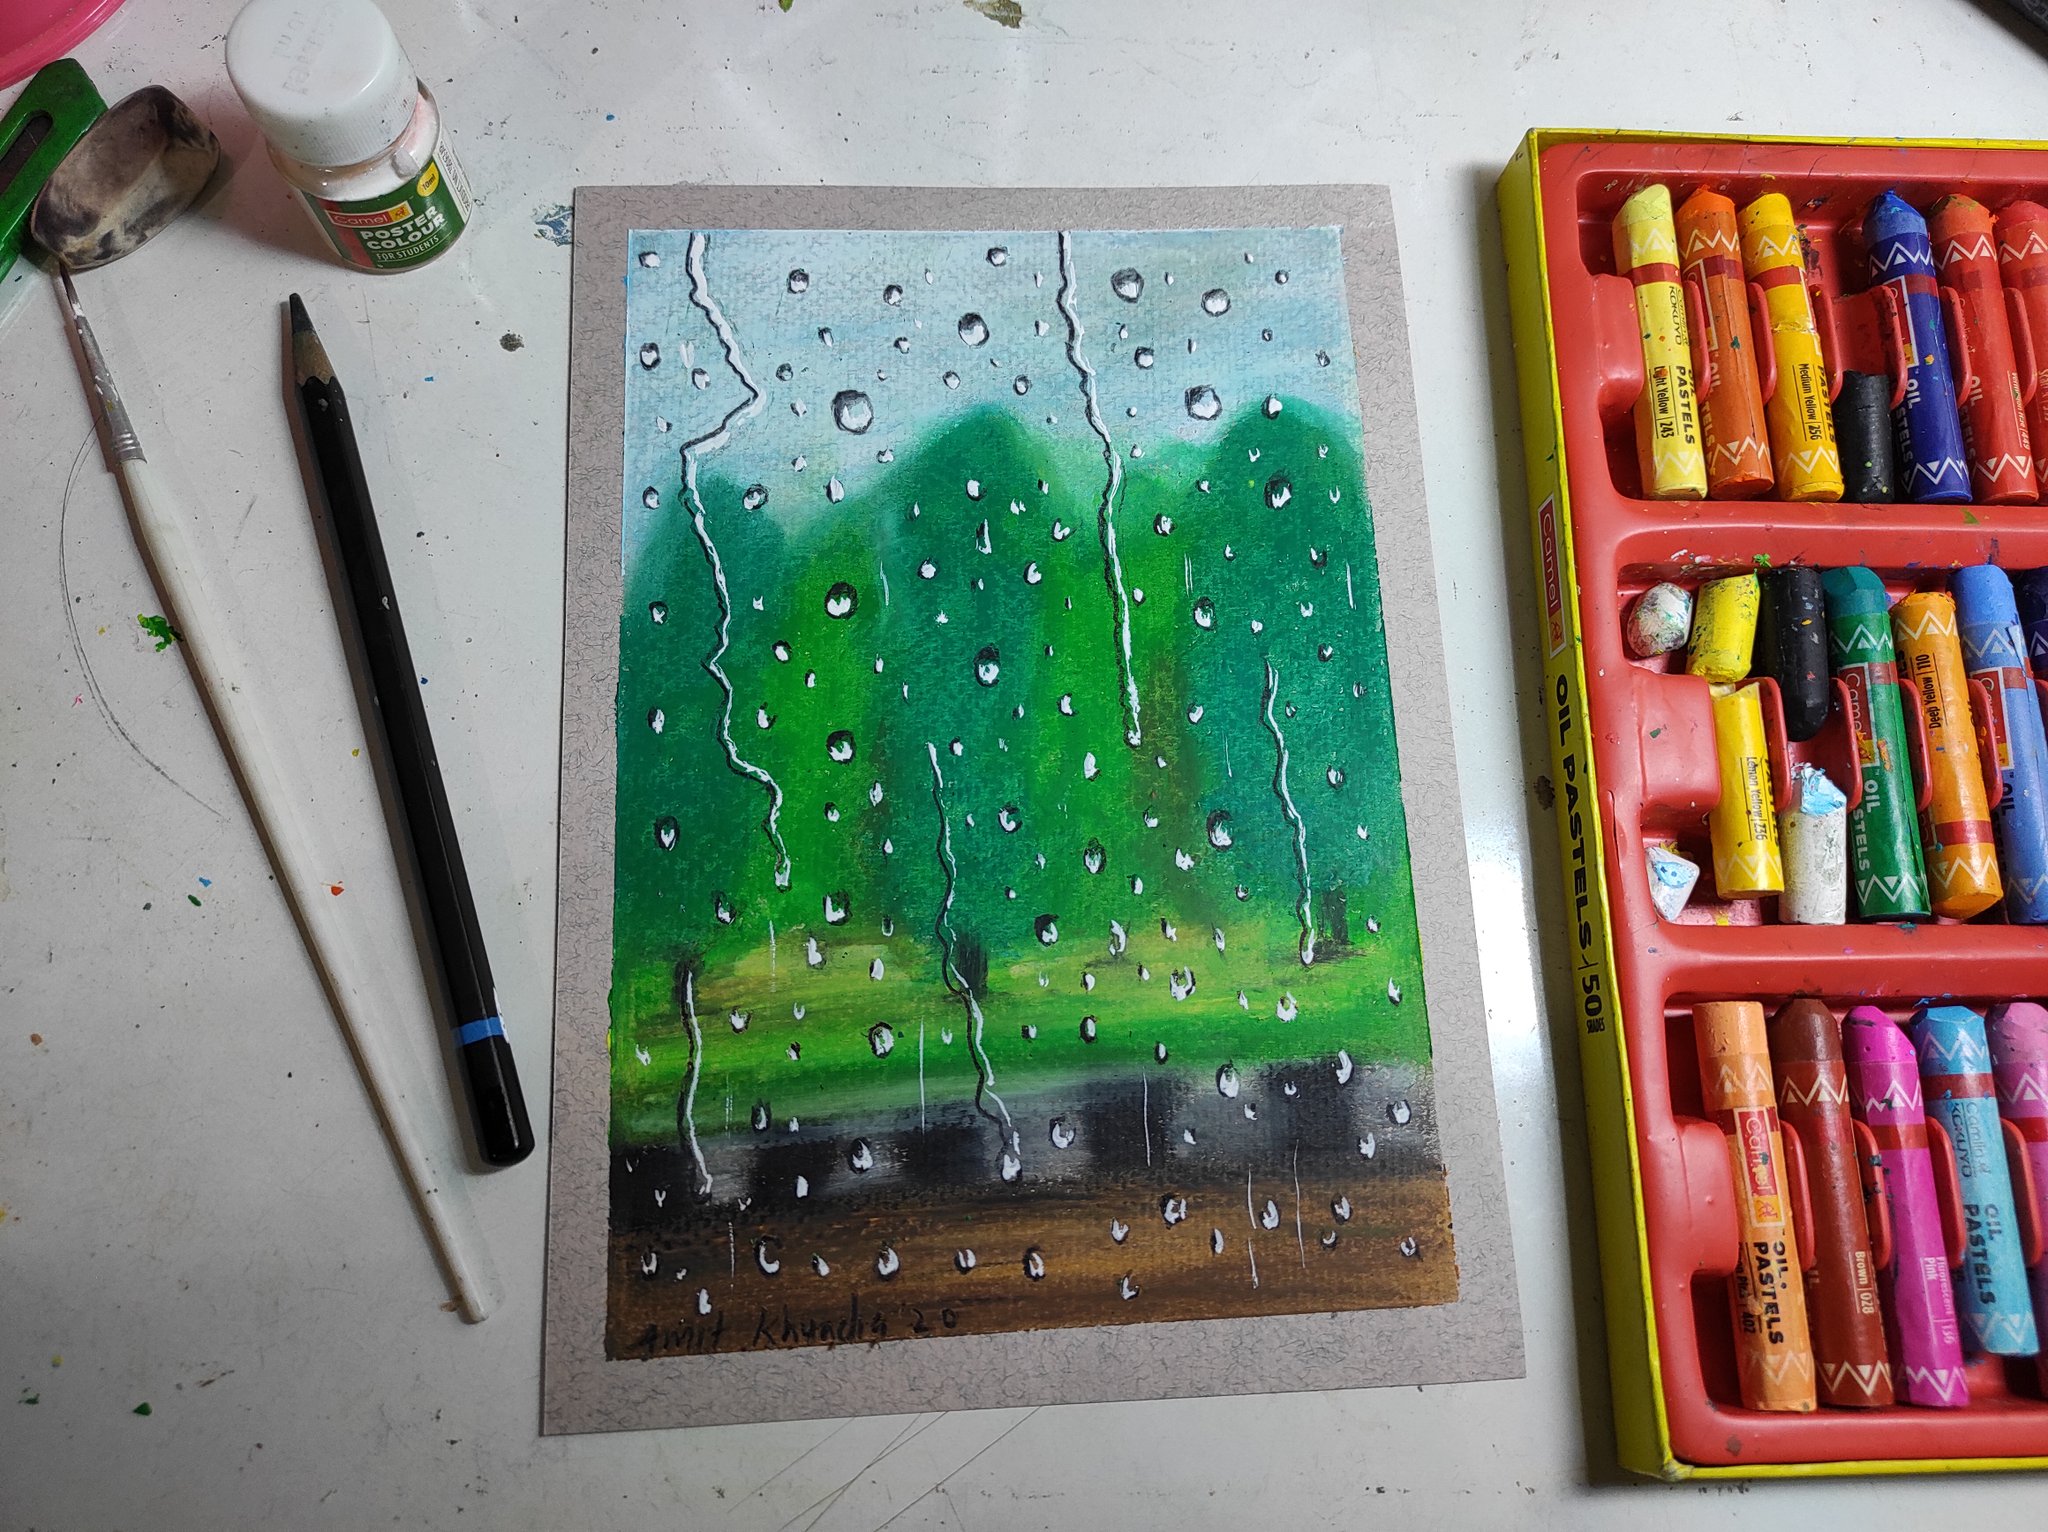 What are some things to draw with oil pastels? - Quora